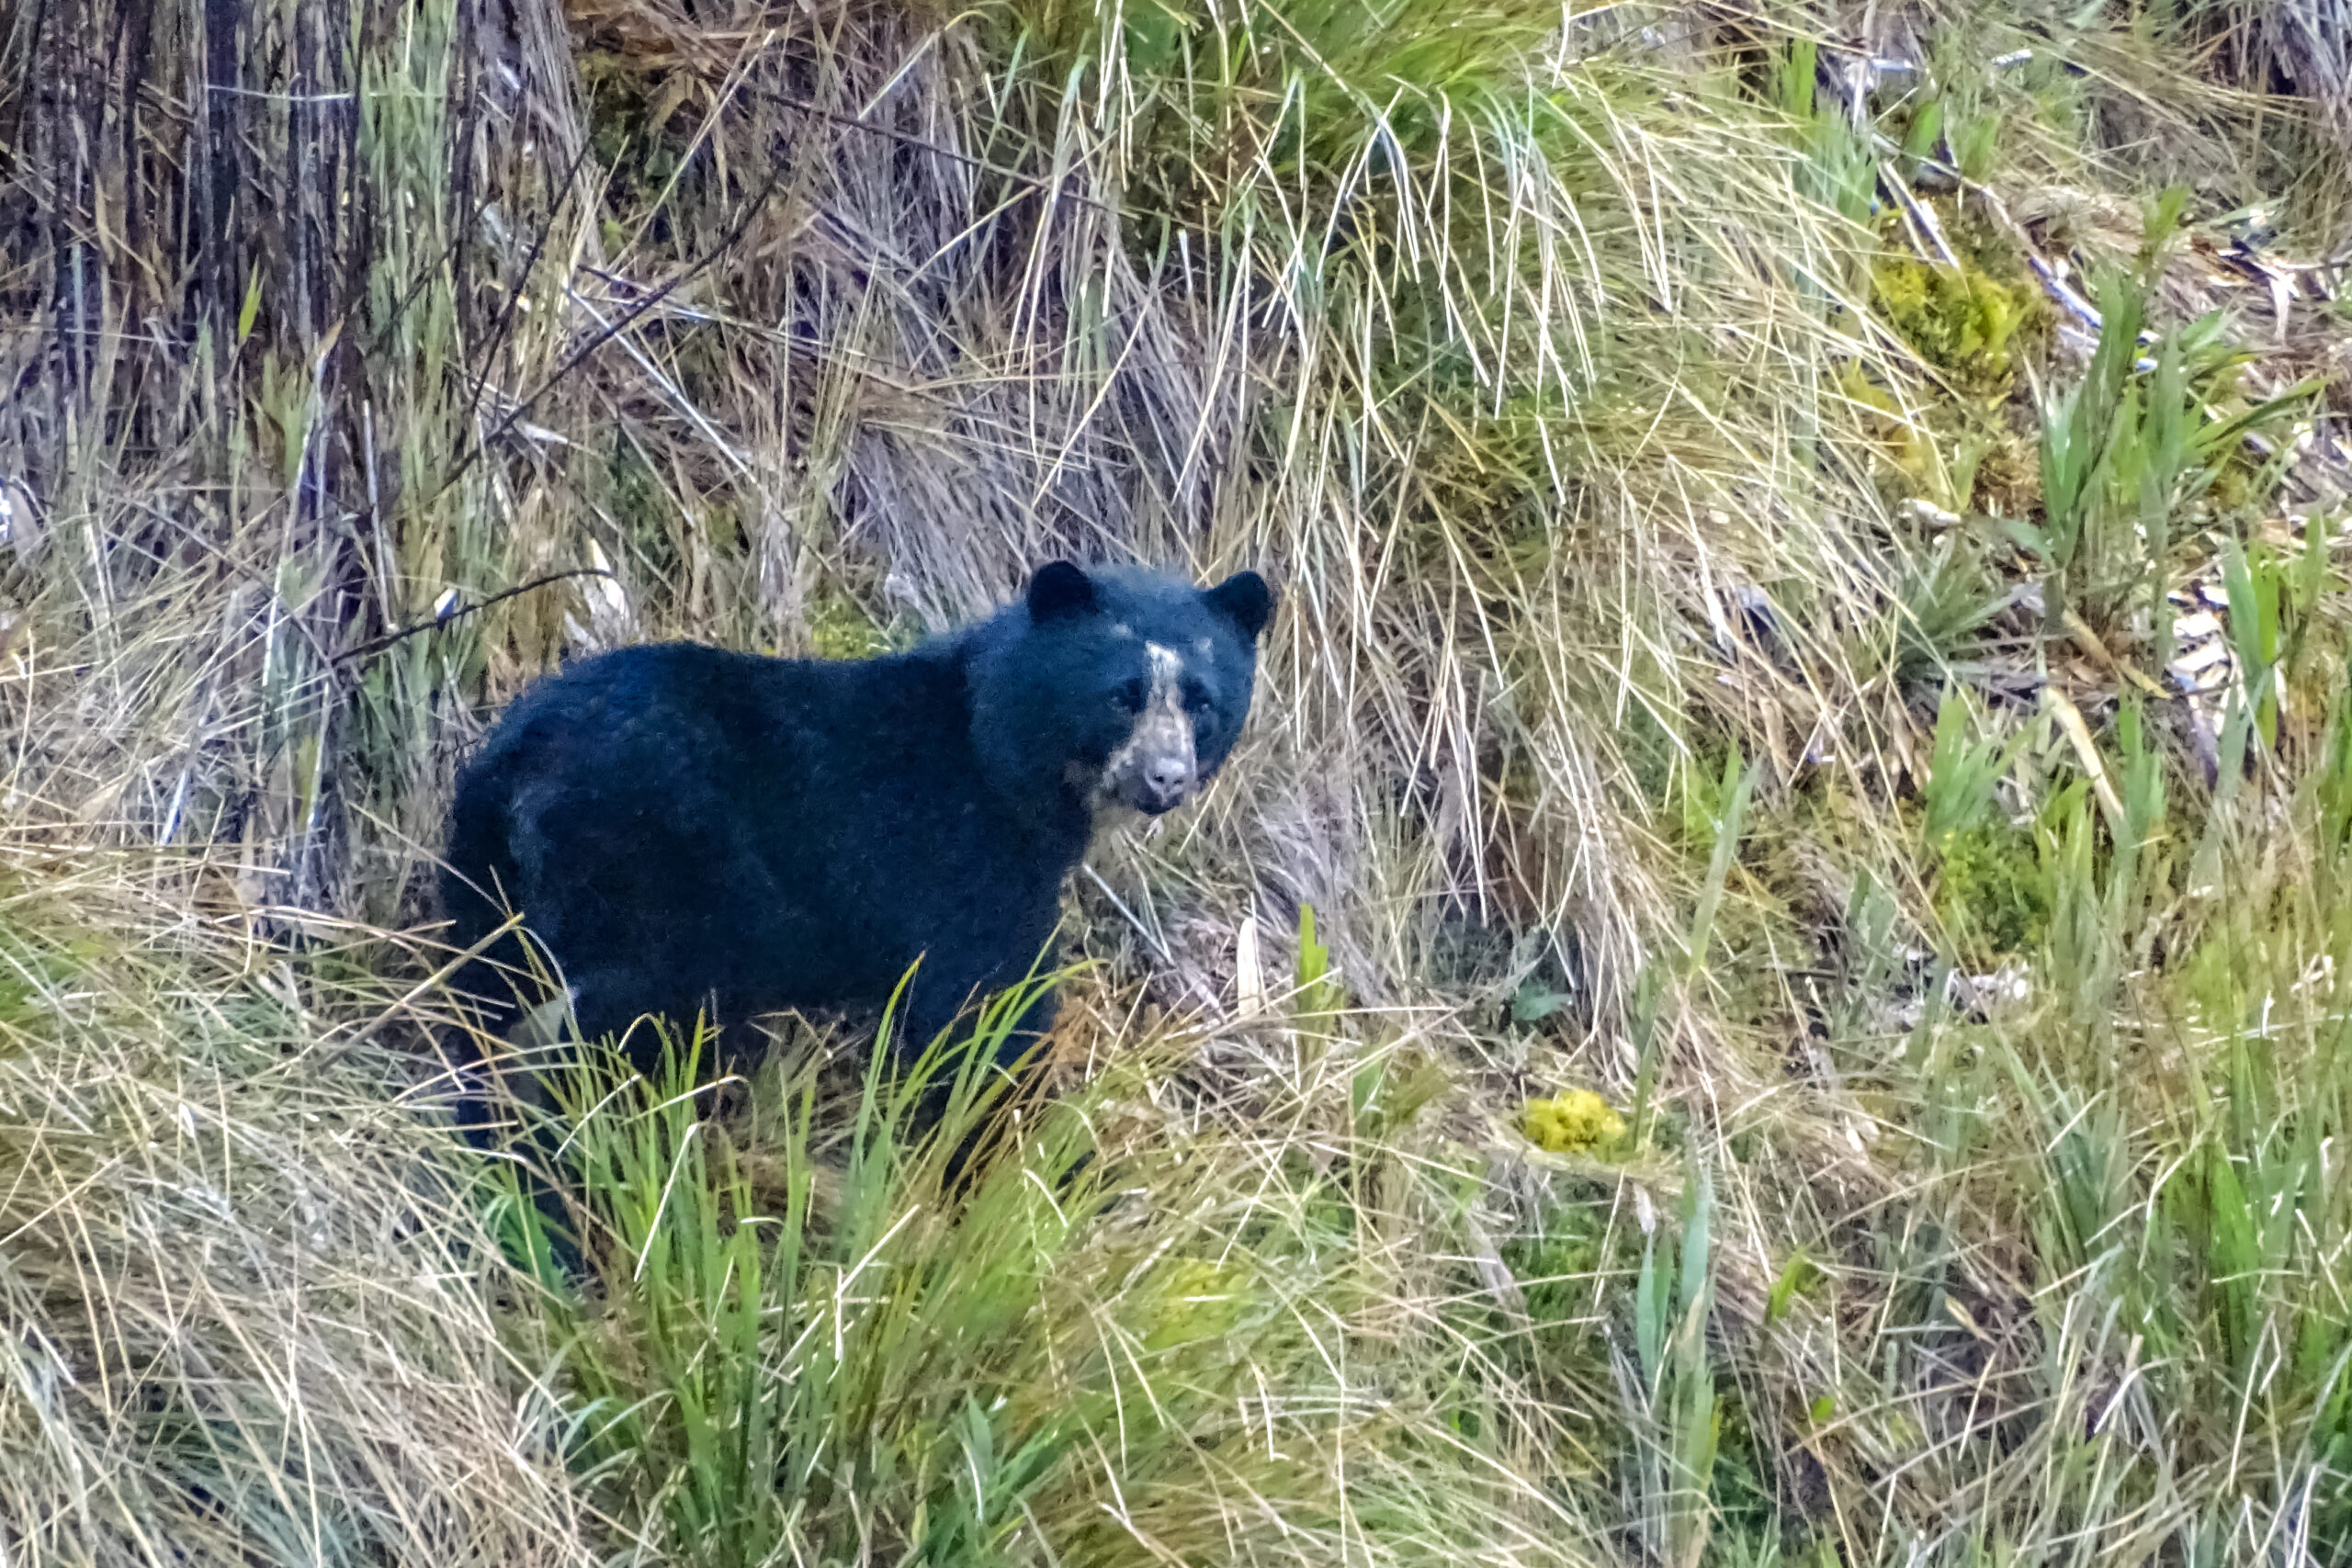 Spectacled Bear is one of the targets when exploring the Cayambe-Coca National Park © Ewan Davies